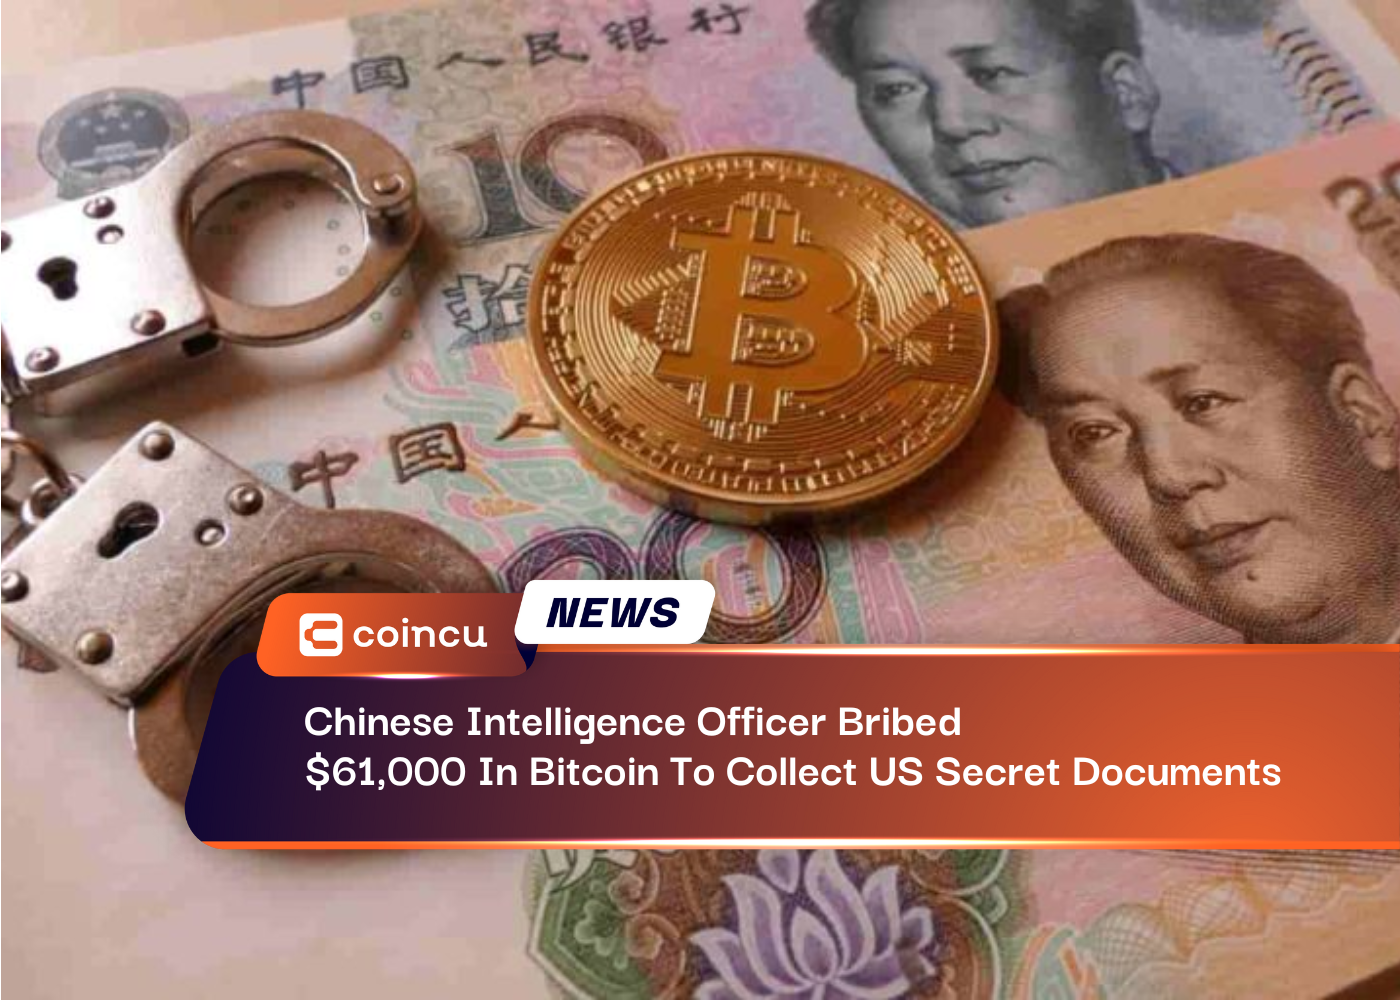 Chinese Intelligence Officer Bribed $61,000 In Bitcoin To Collect US Secret Documents